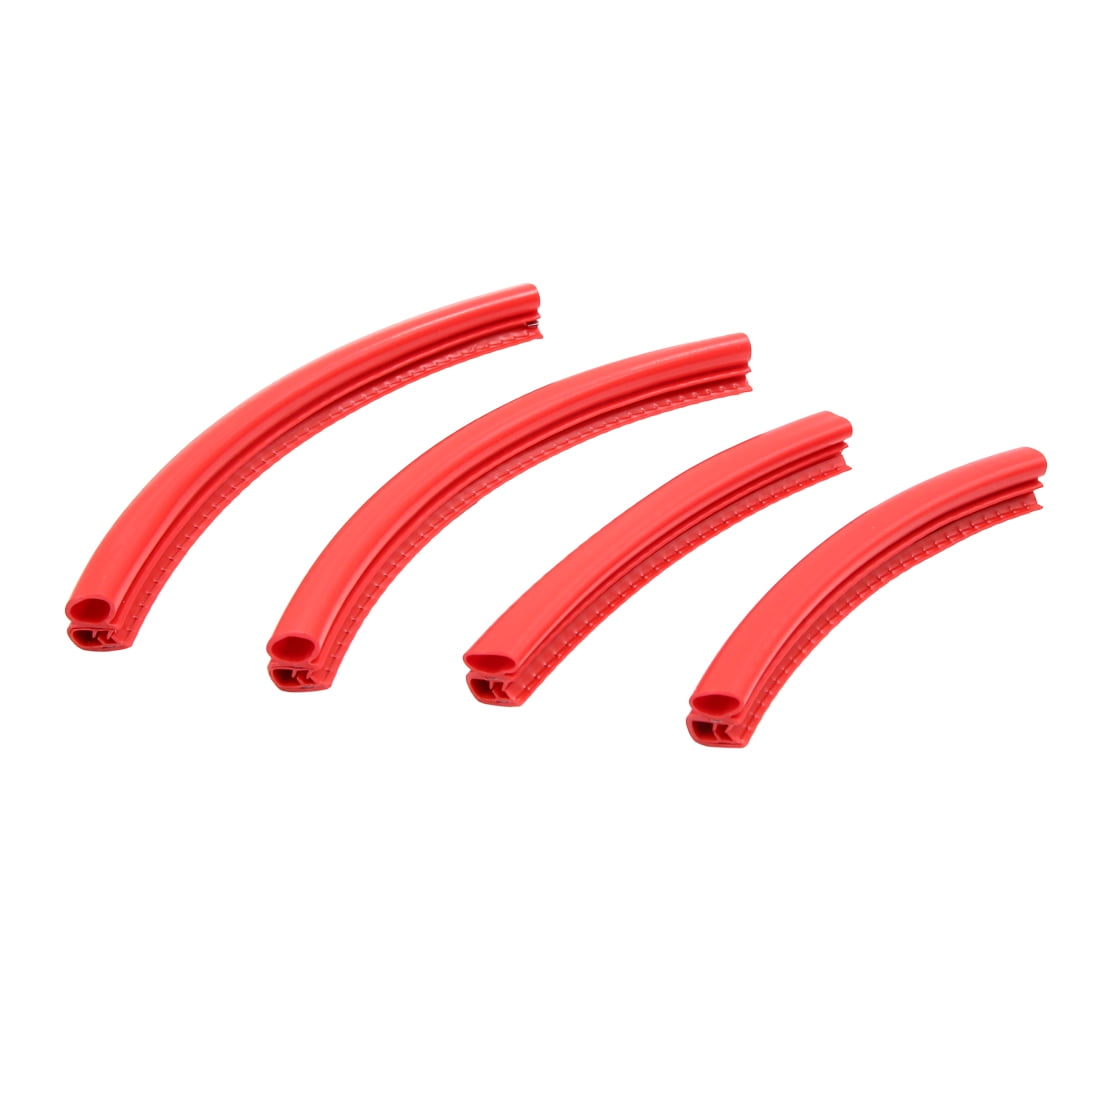 4PCs Set iPick Image Ford Mustang 5.0 Real Red Carbon Fiber Car Door Edge Guard 4 Edge Protection Trims Stickers